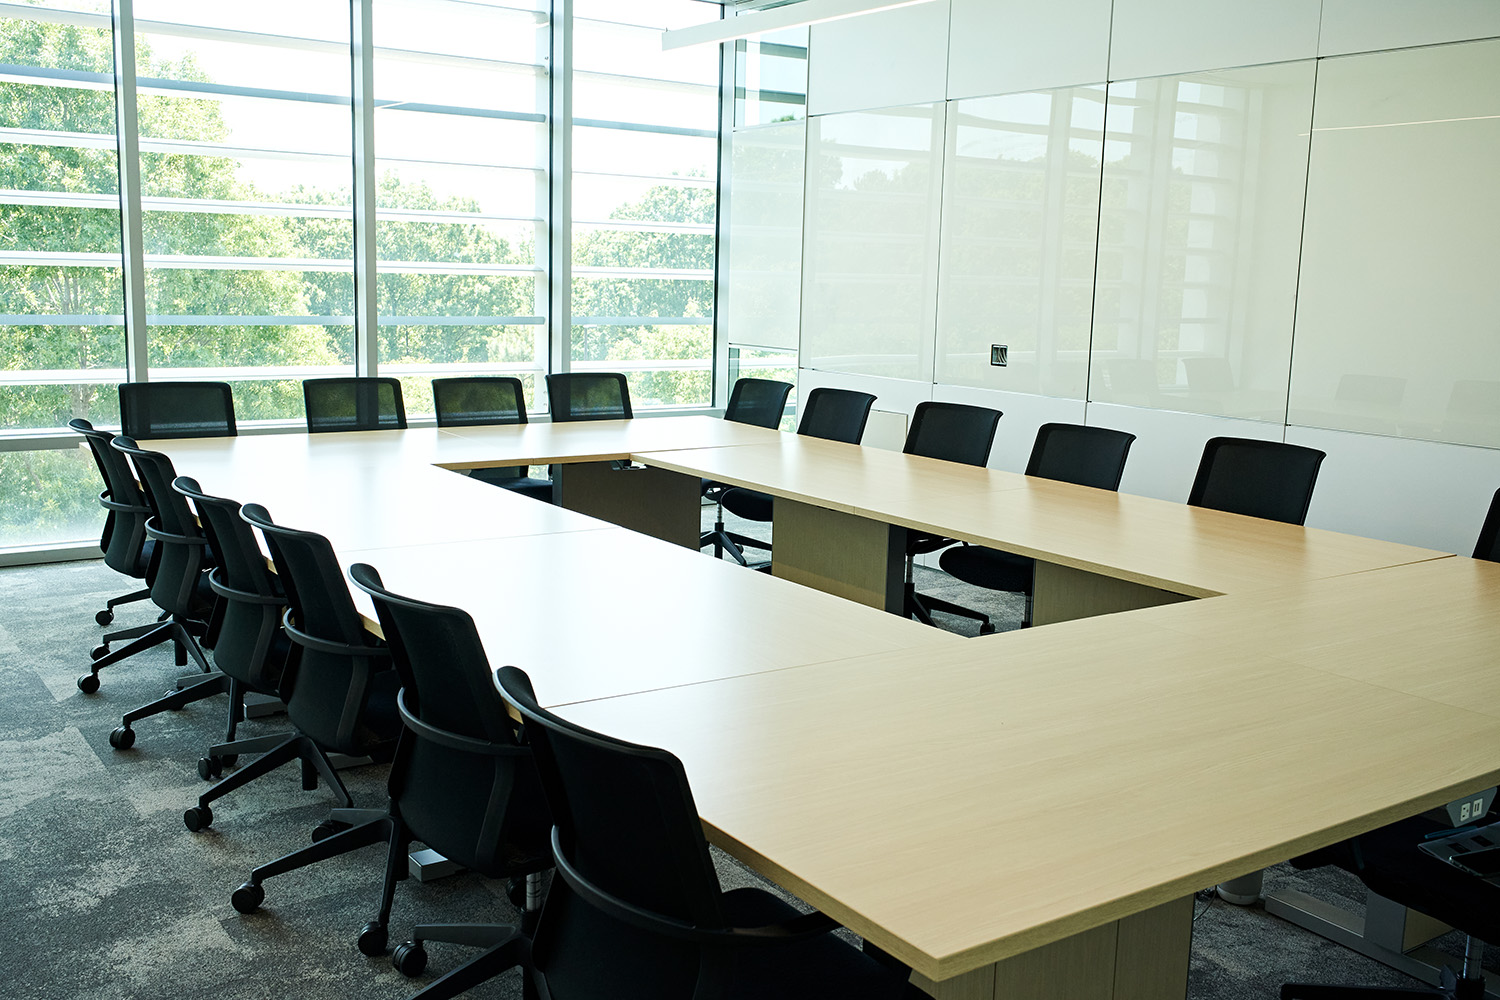 The PSB conference rooms have spectacular views that are perfect for smaller meetings. Each conference room is equipped with a large flat screen TV to use for presentations. Our larger conference room can accommodate up to 20 people and our smaller conference room can accommodate up to 14 people.